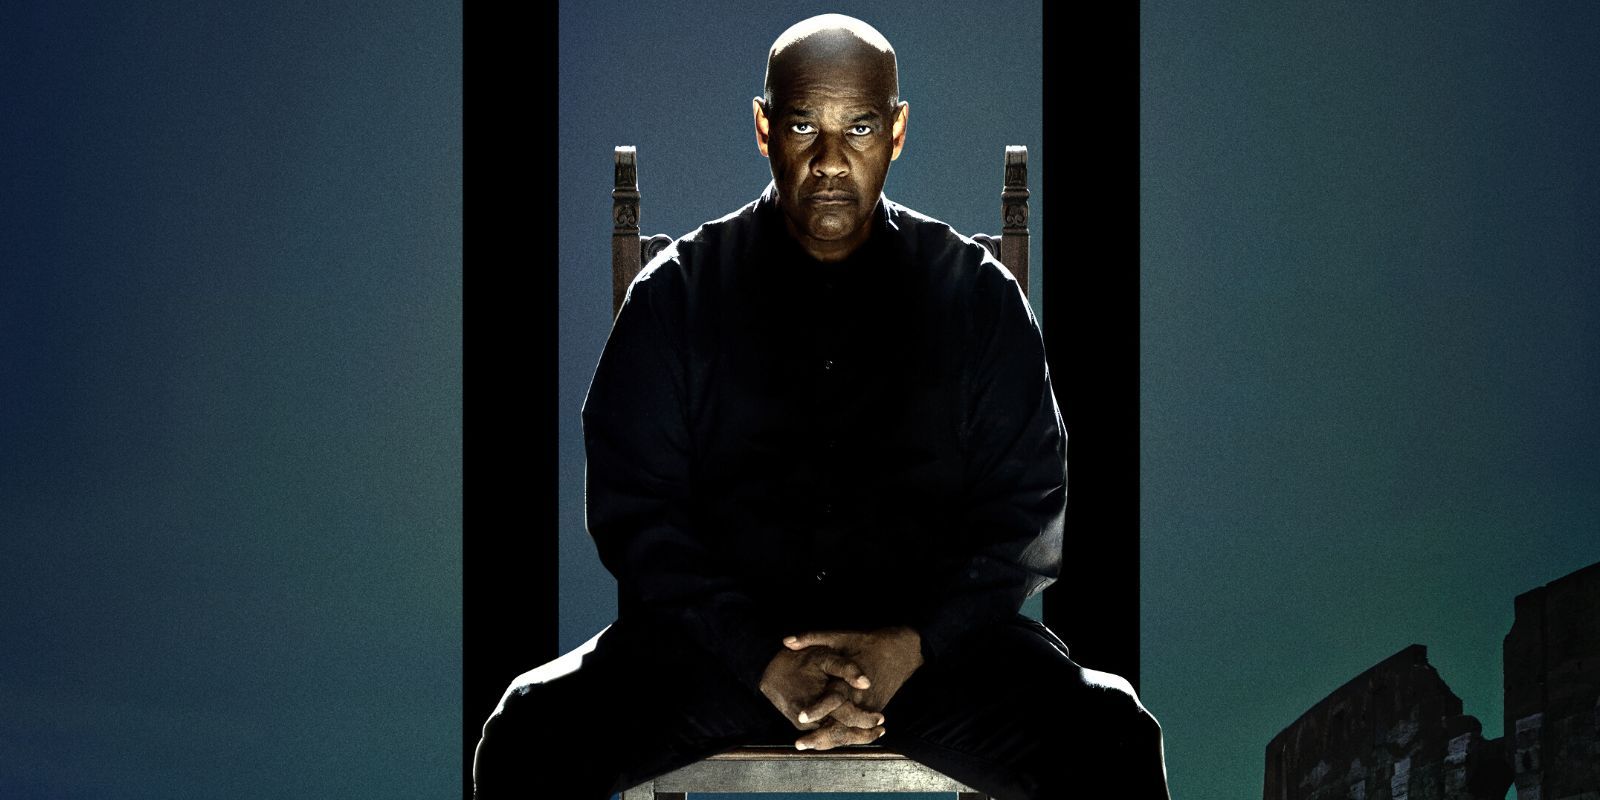 Denzel Washington in a black suit sitting on an antique chair with his hands folded